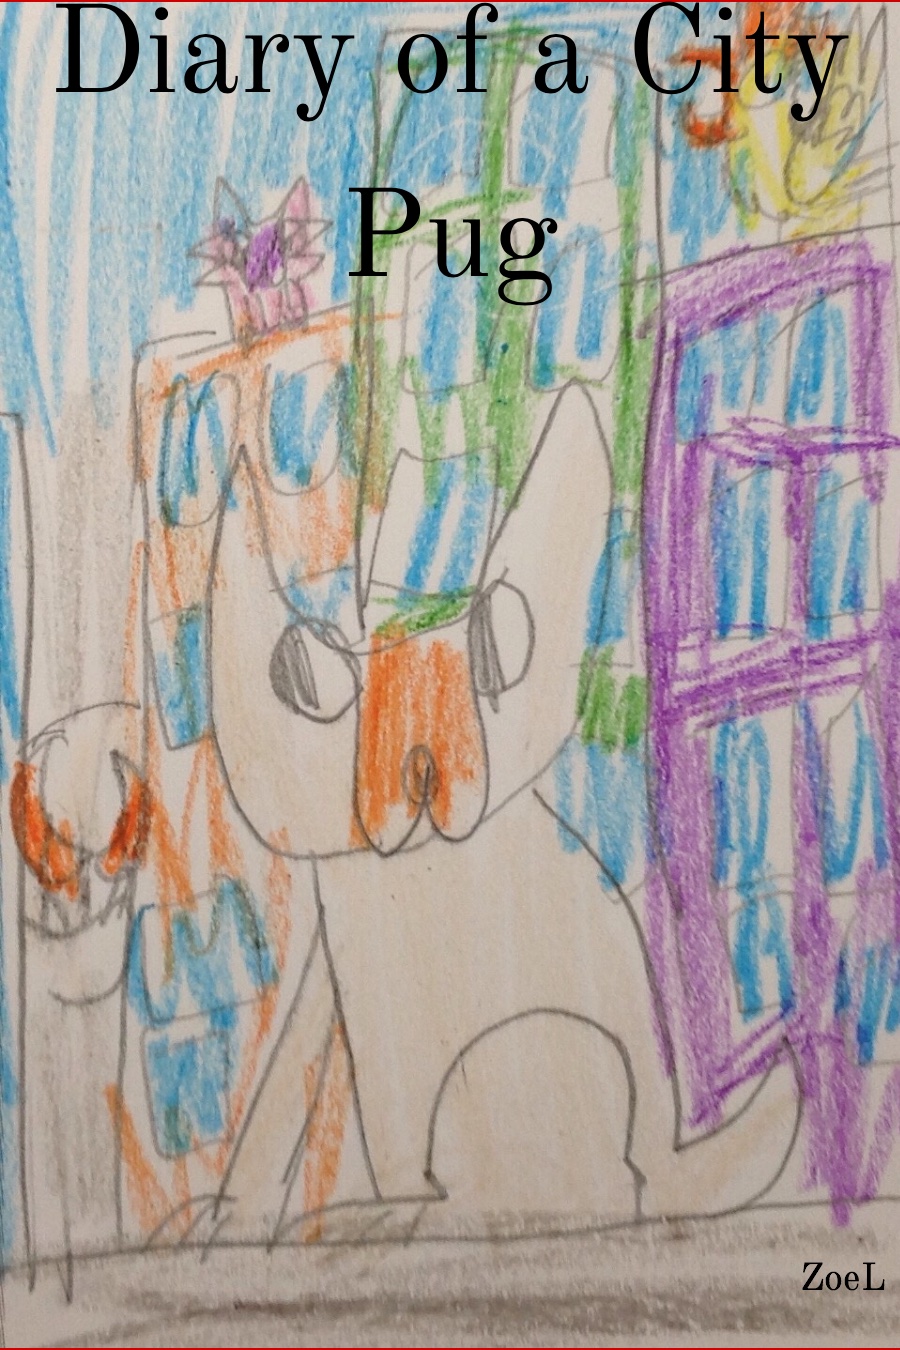 Diary of a City Pug by Zoe L